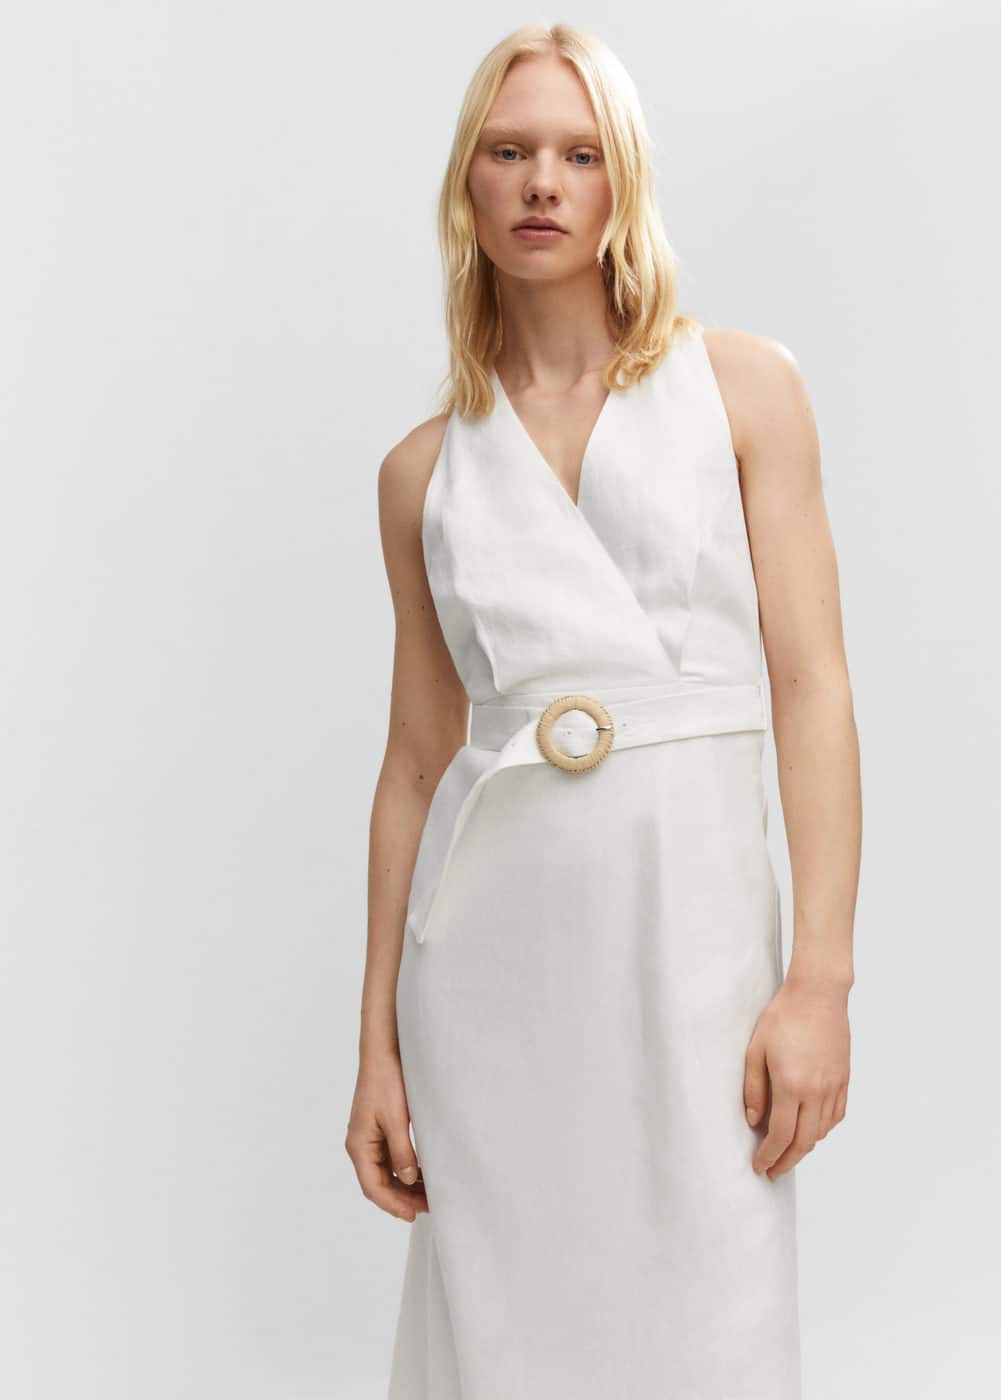 Altitud regular poco I Predict This Mango Linen Dress Will Be a Quick Sell-Out | Who What Wear